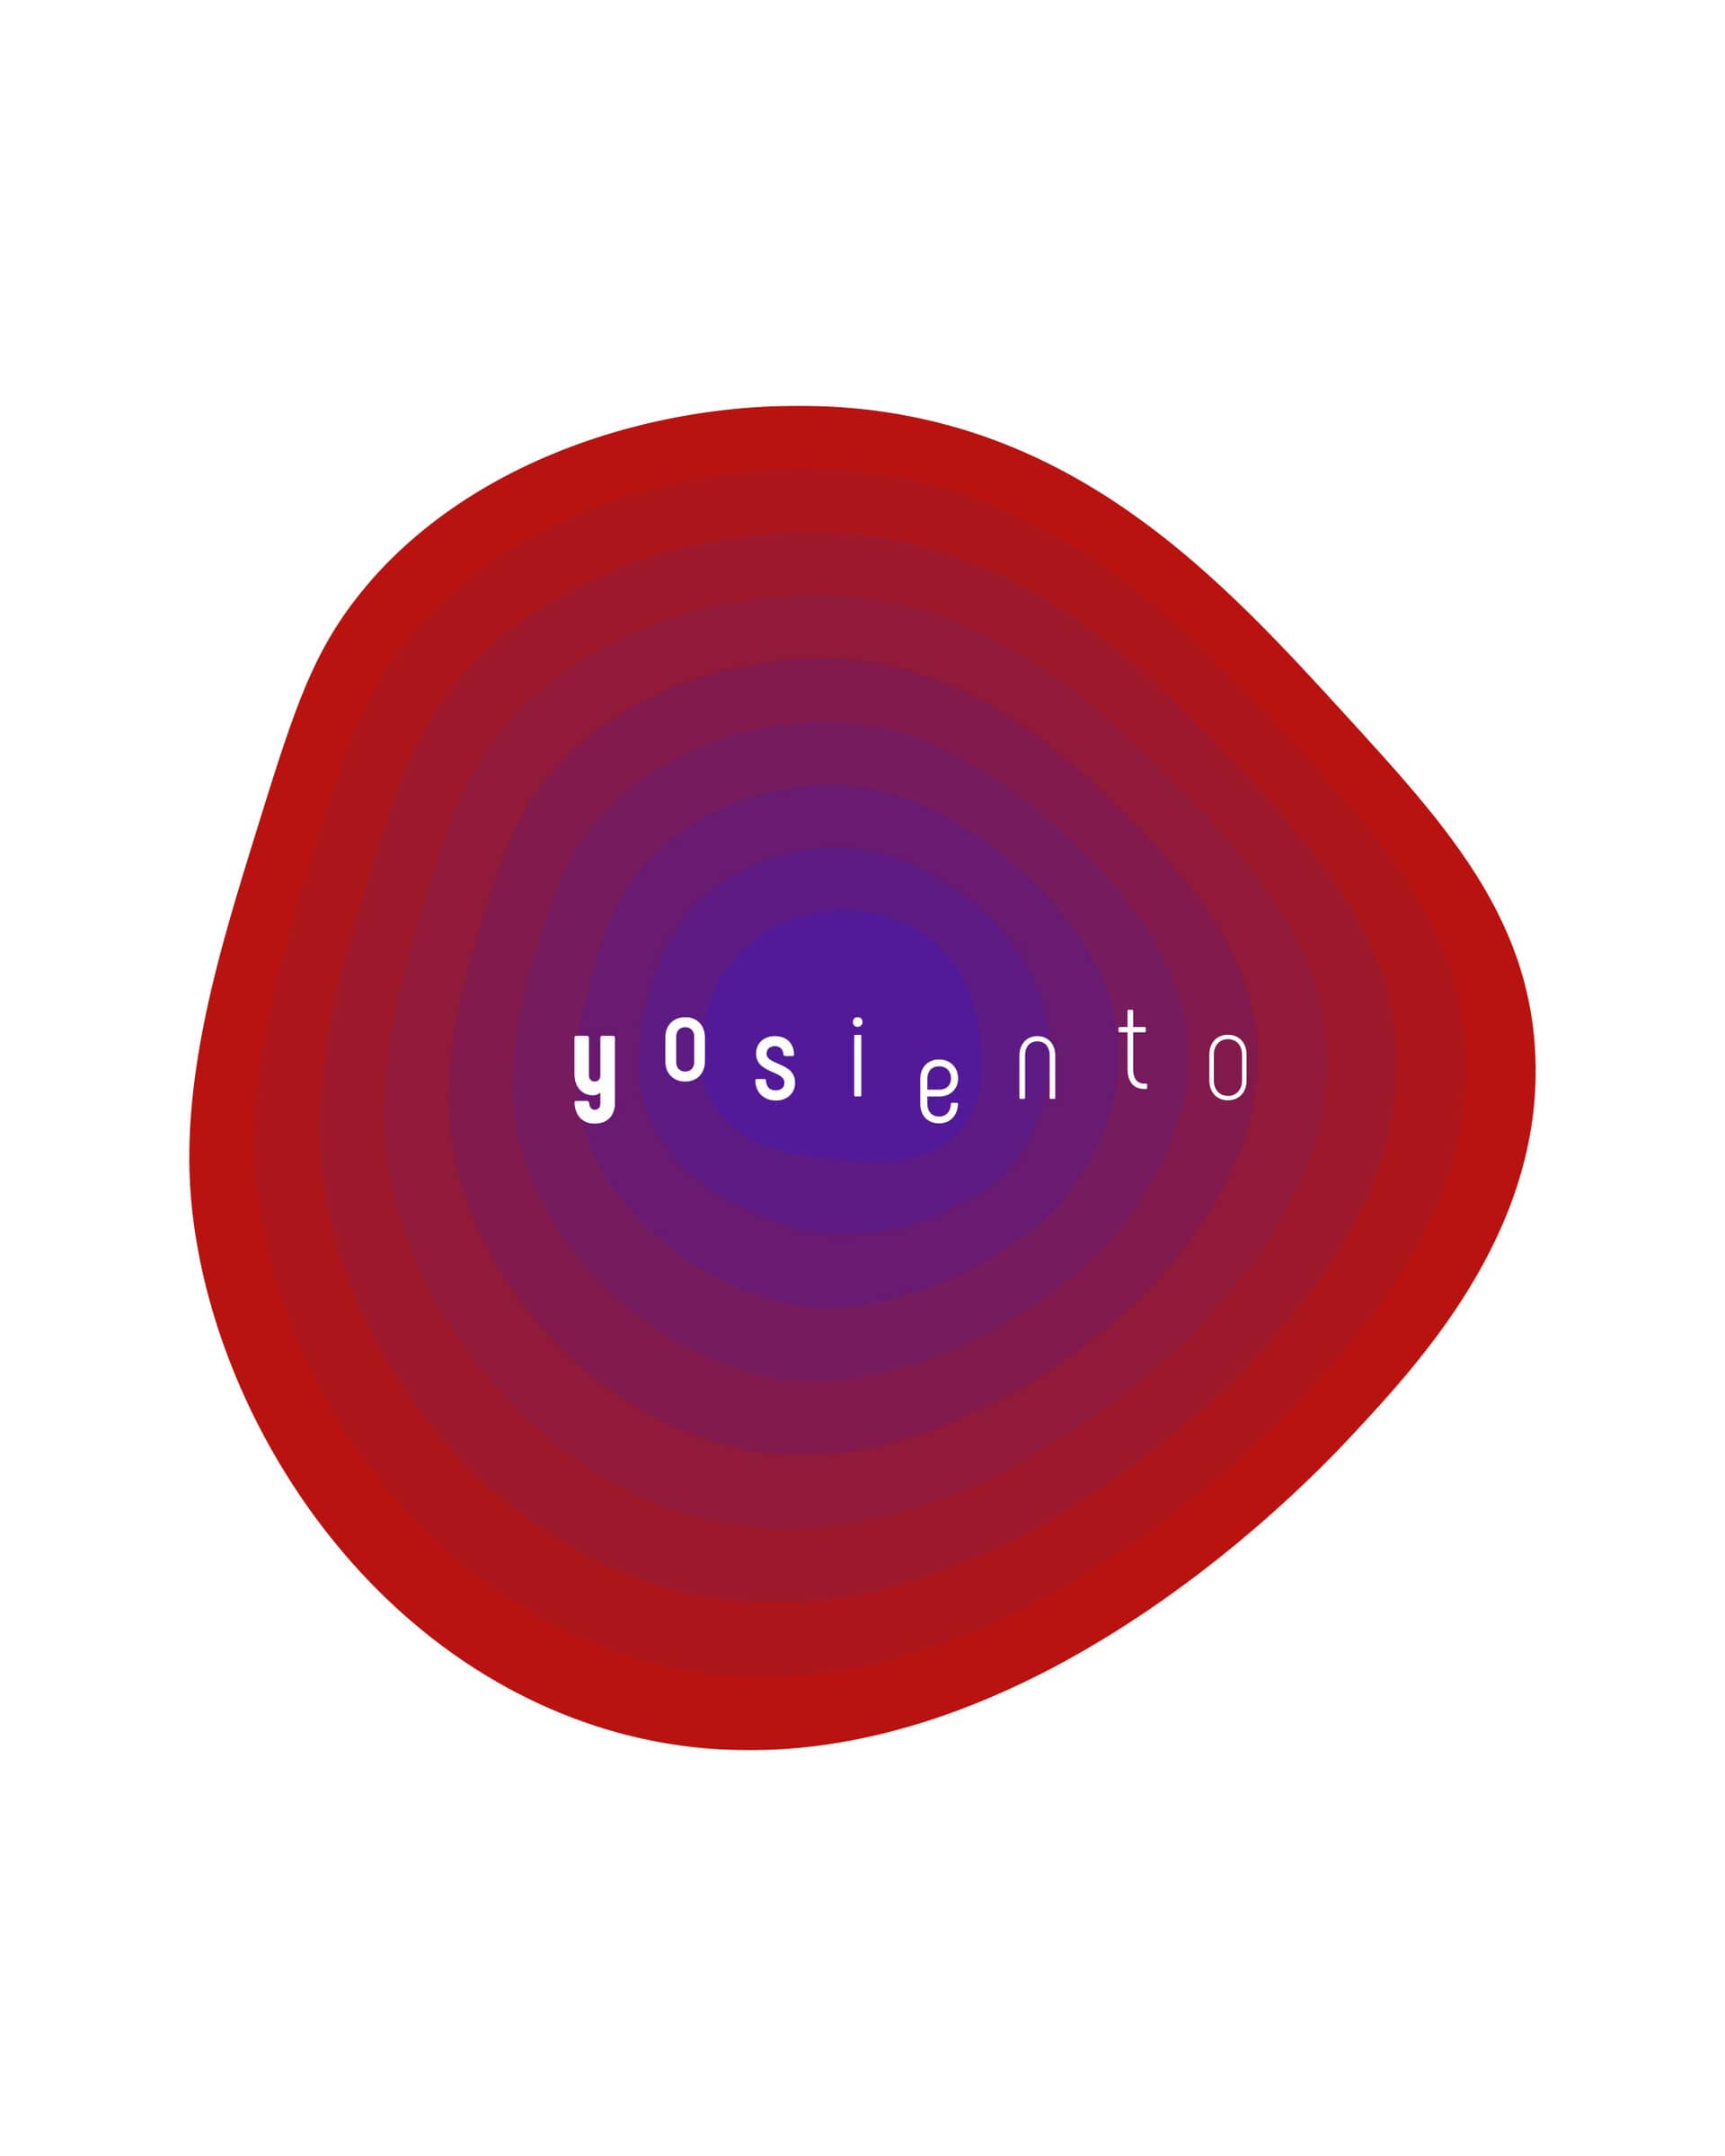 Yosiento logo in an organic shape container